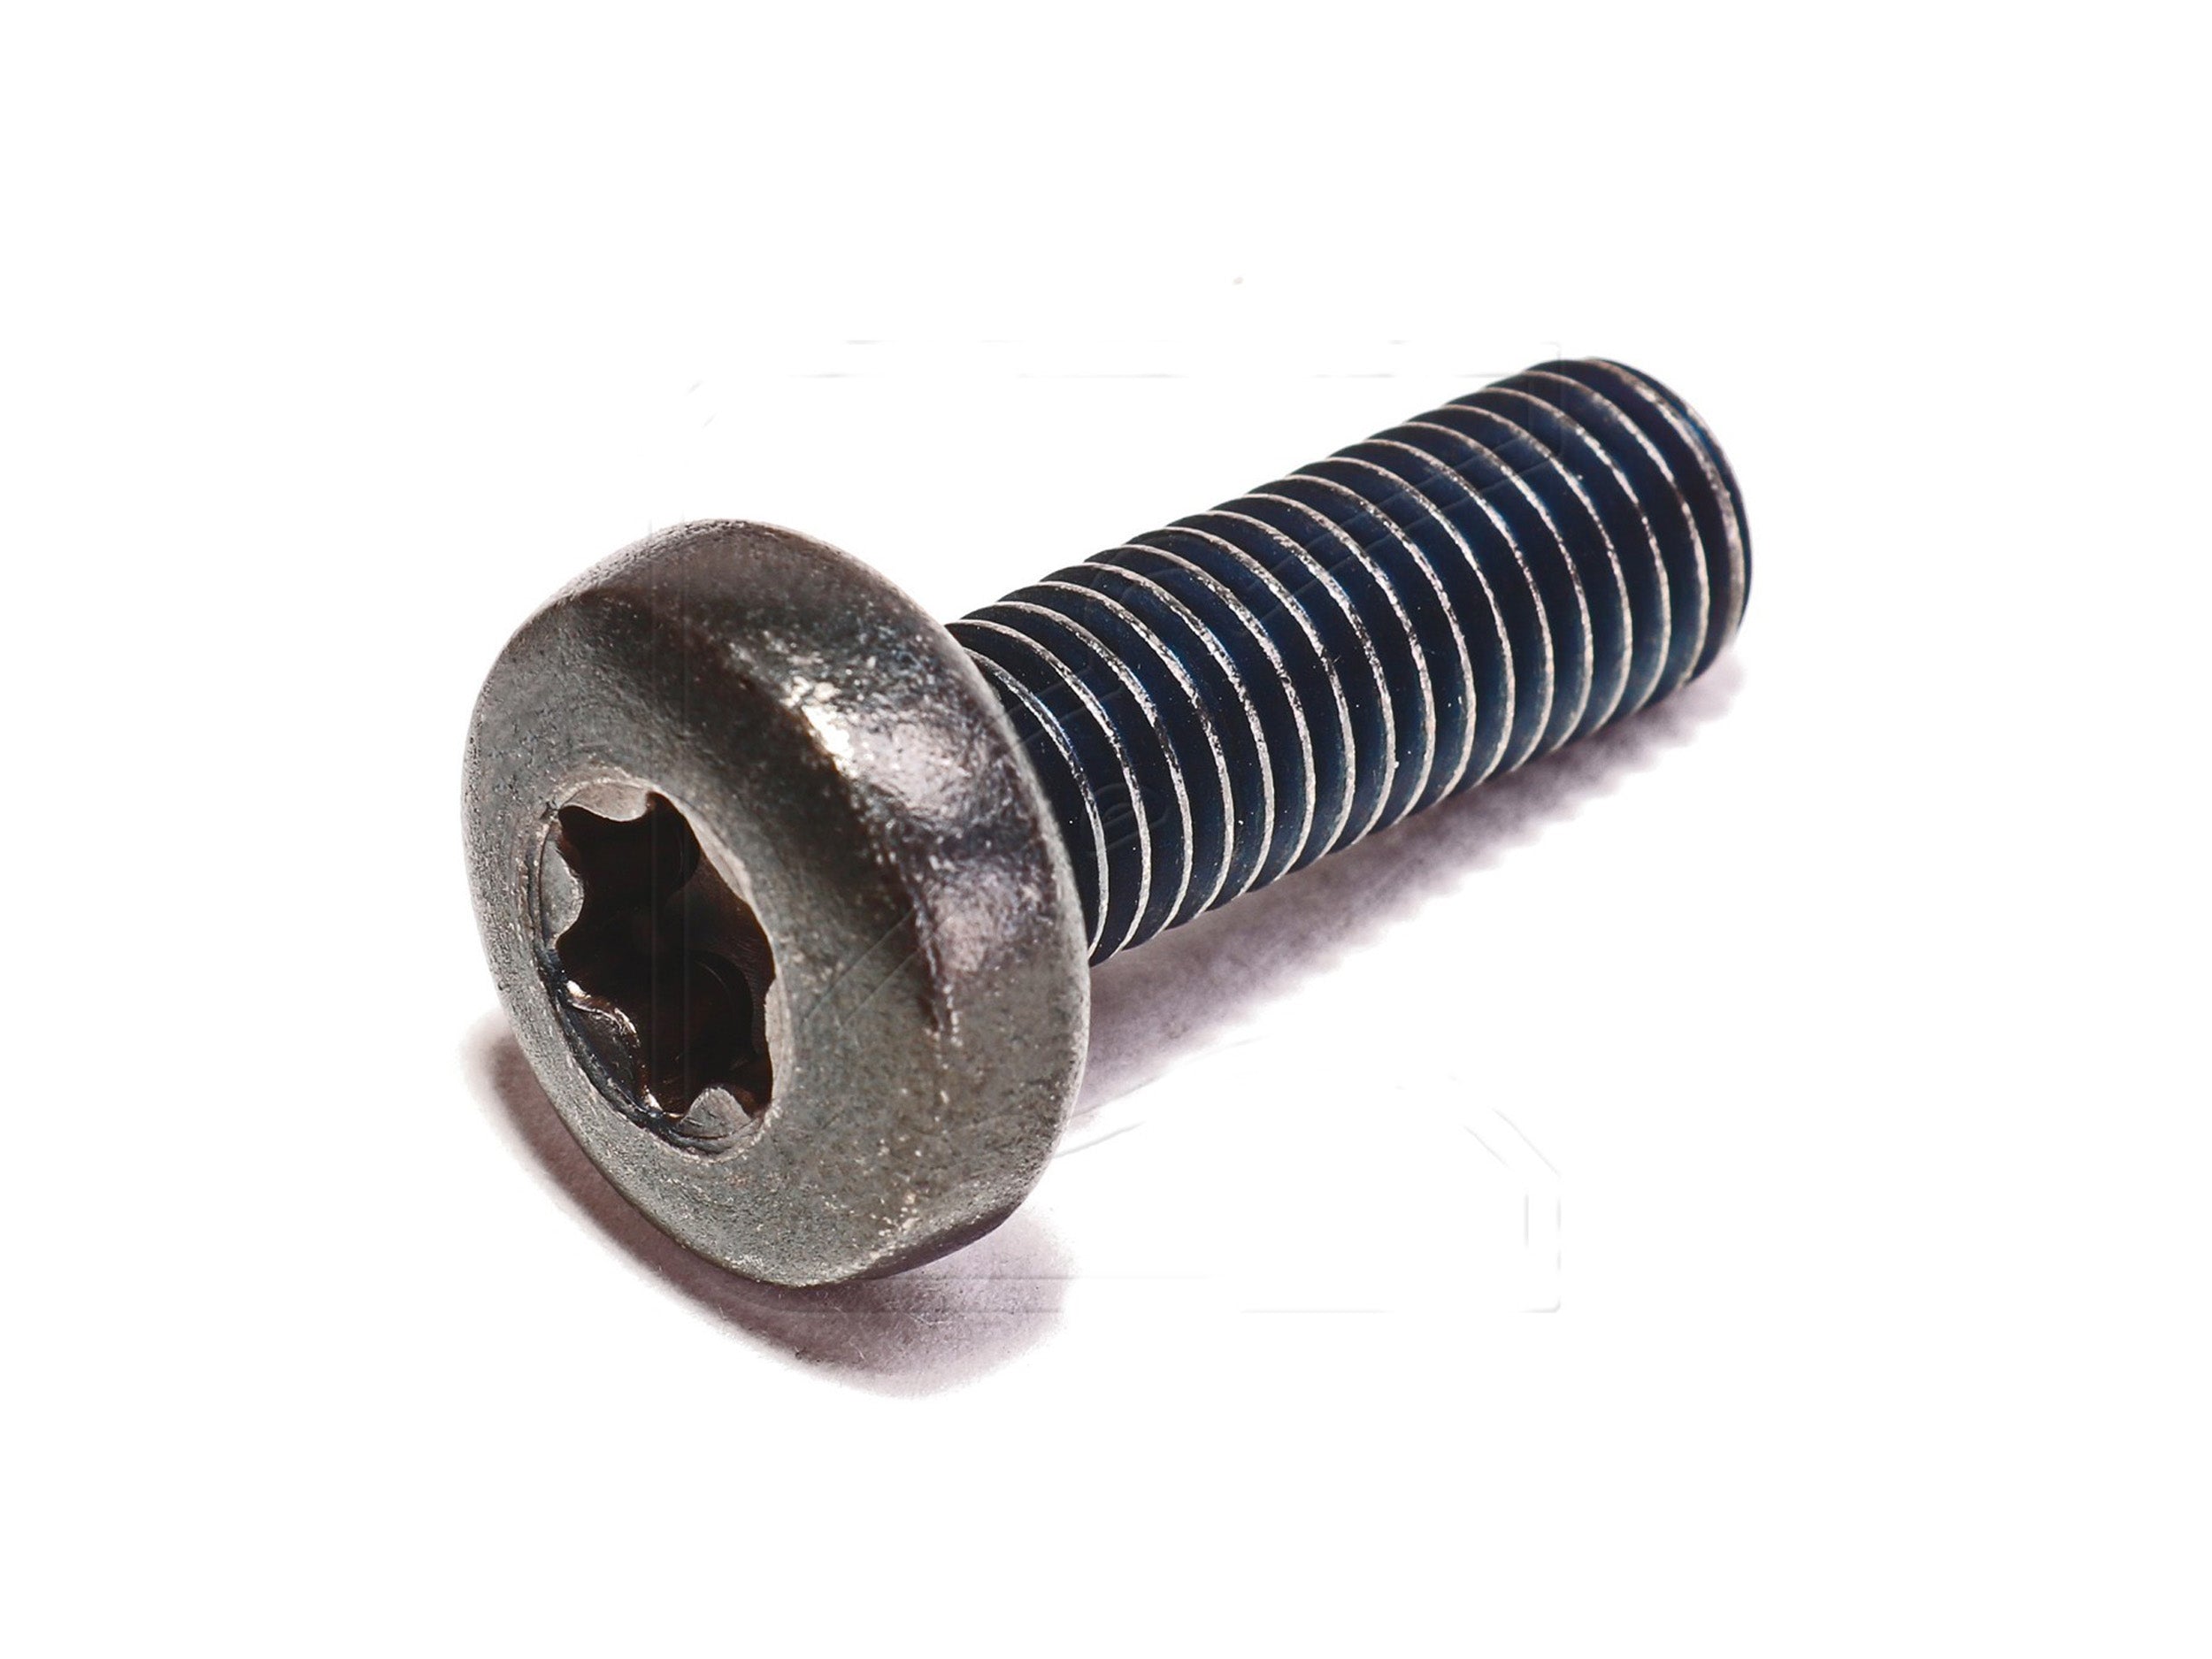 High Tensile Stainless Steel Bolts - for NAS Defender Roll Cage (*sold individually*, available in bare stainless or black oxide coated)